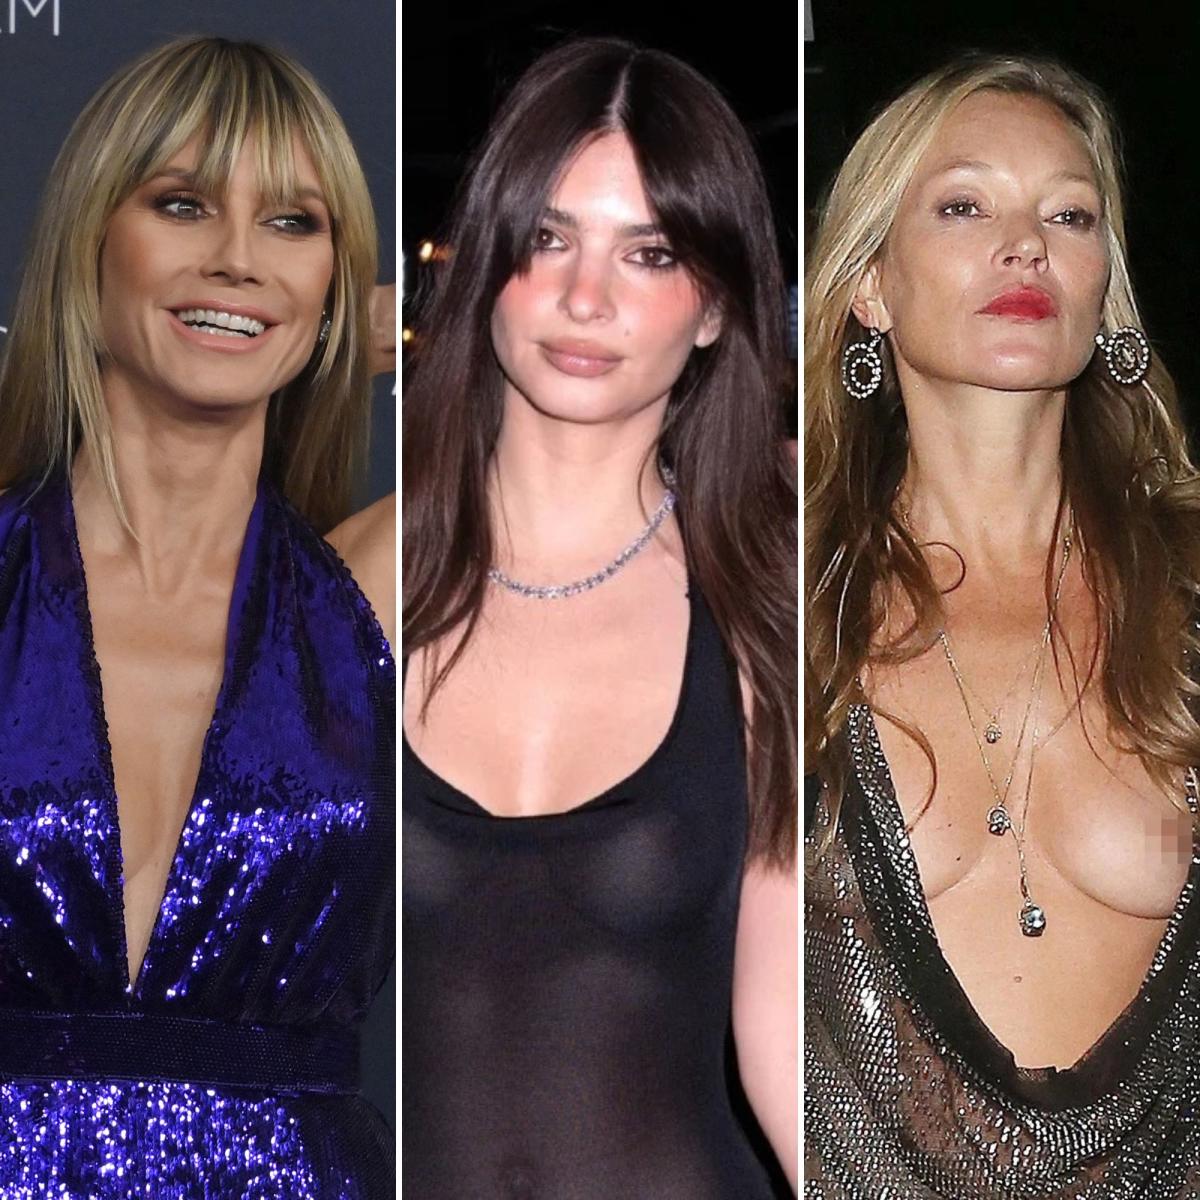 Celeb nip slips and dress rips: When things didn't go their way in 2017